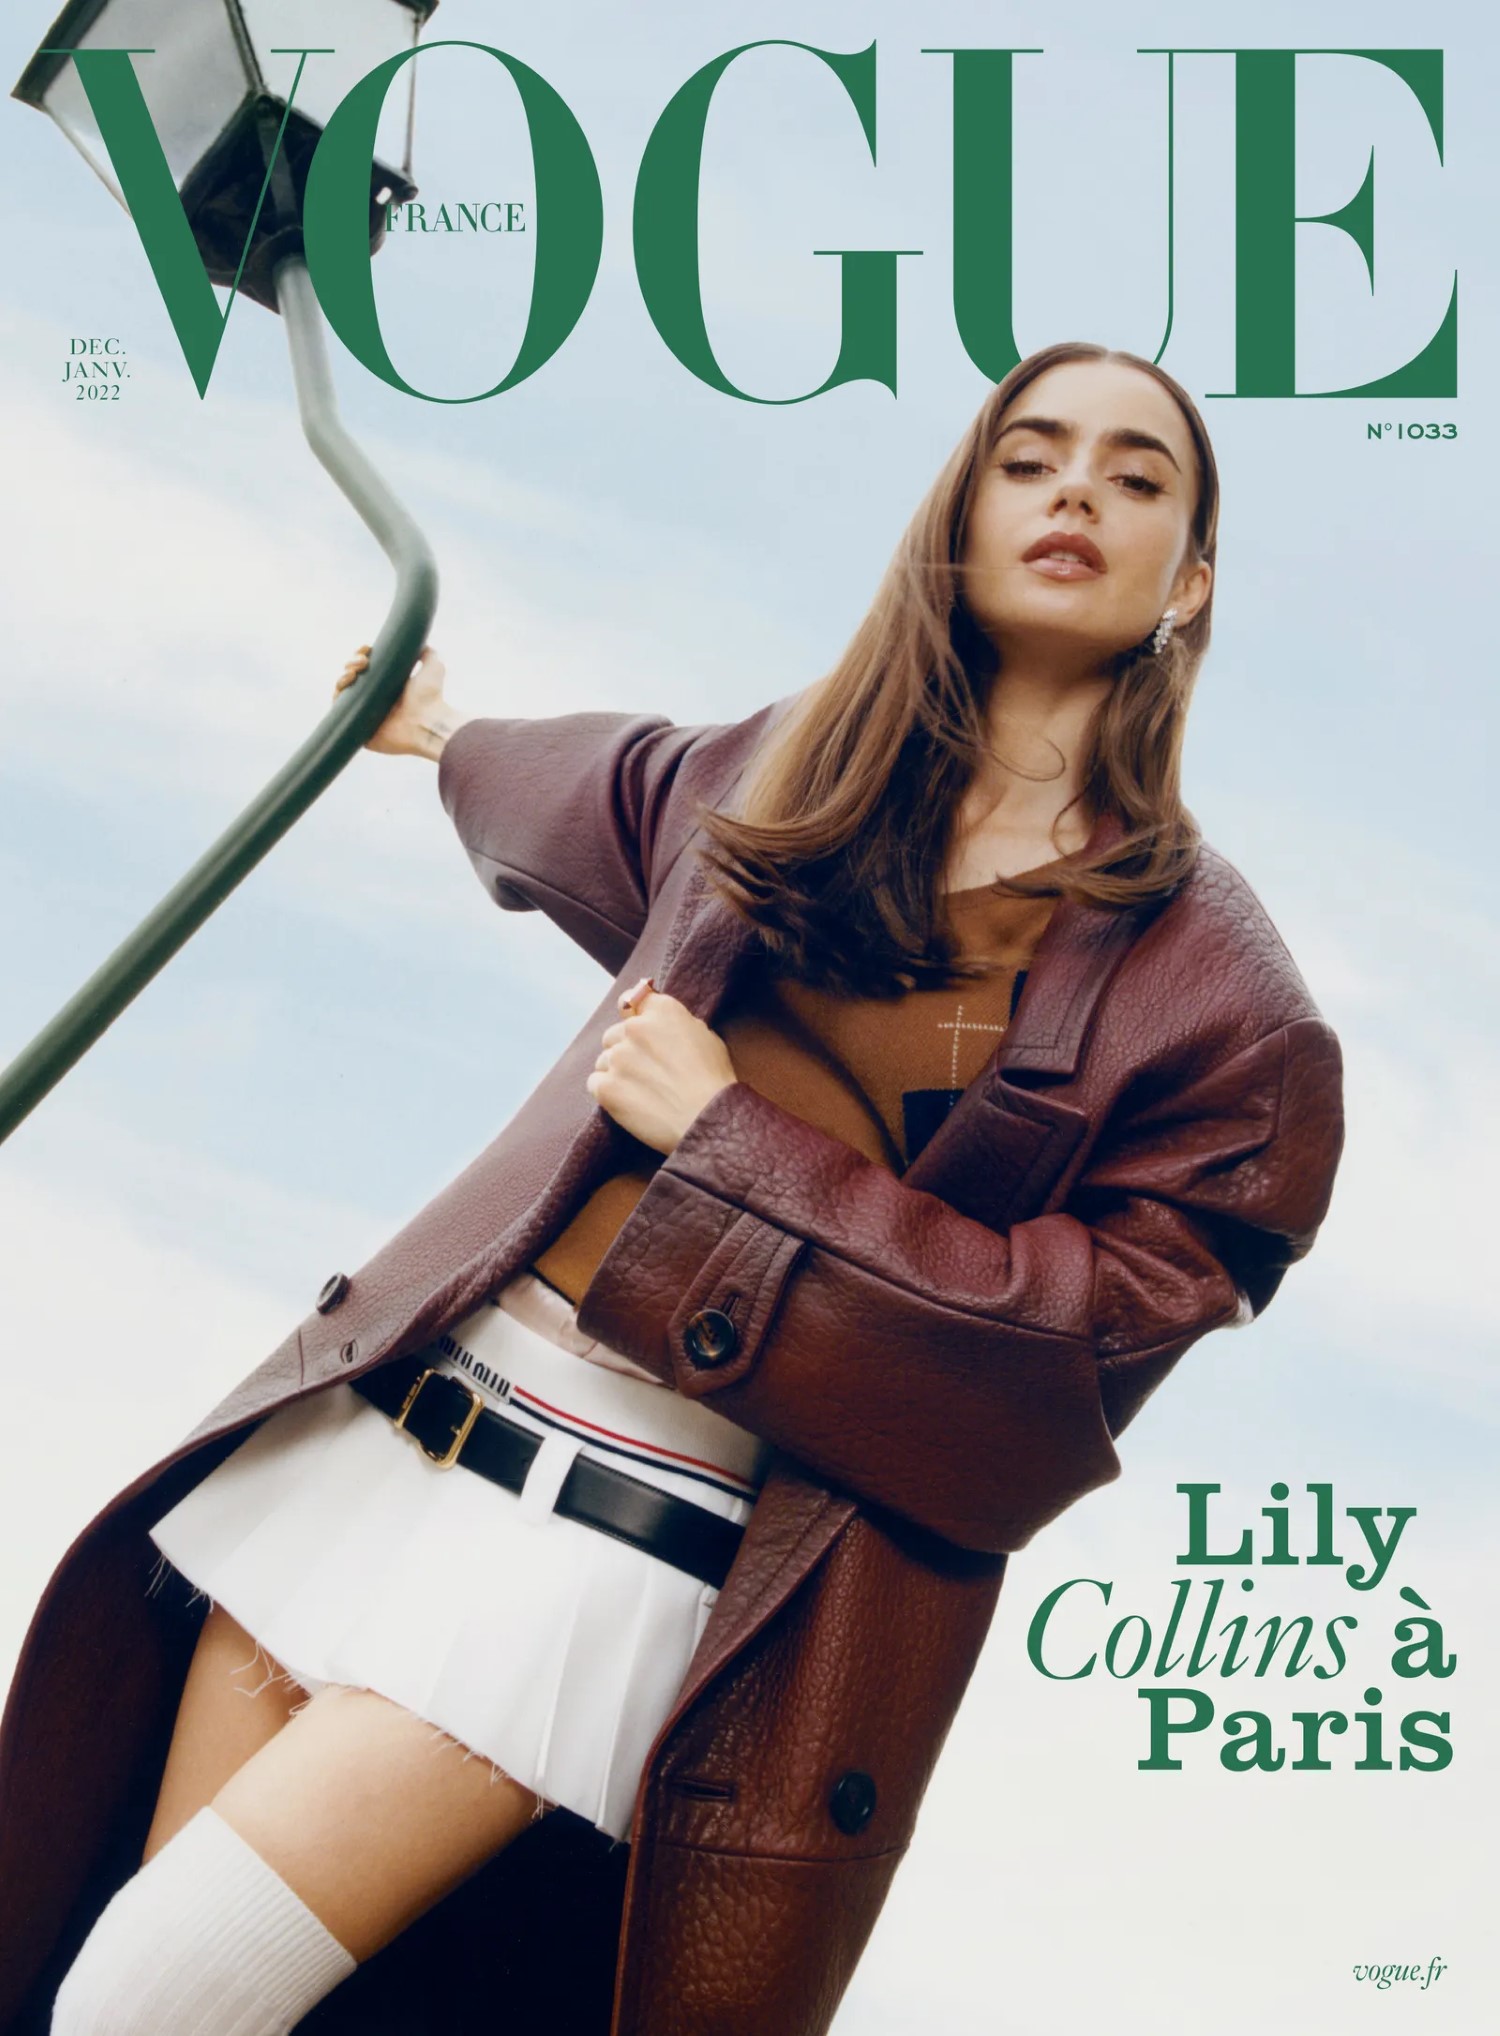 Lily Collins covers Vogue France December 2022 January 2023 by Maciek Pożoga